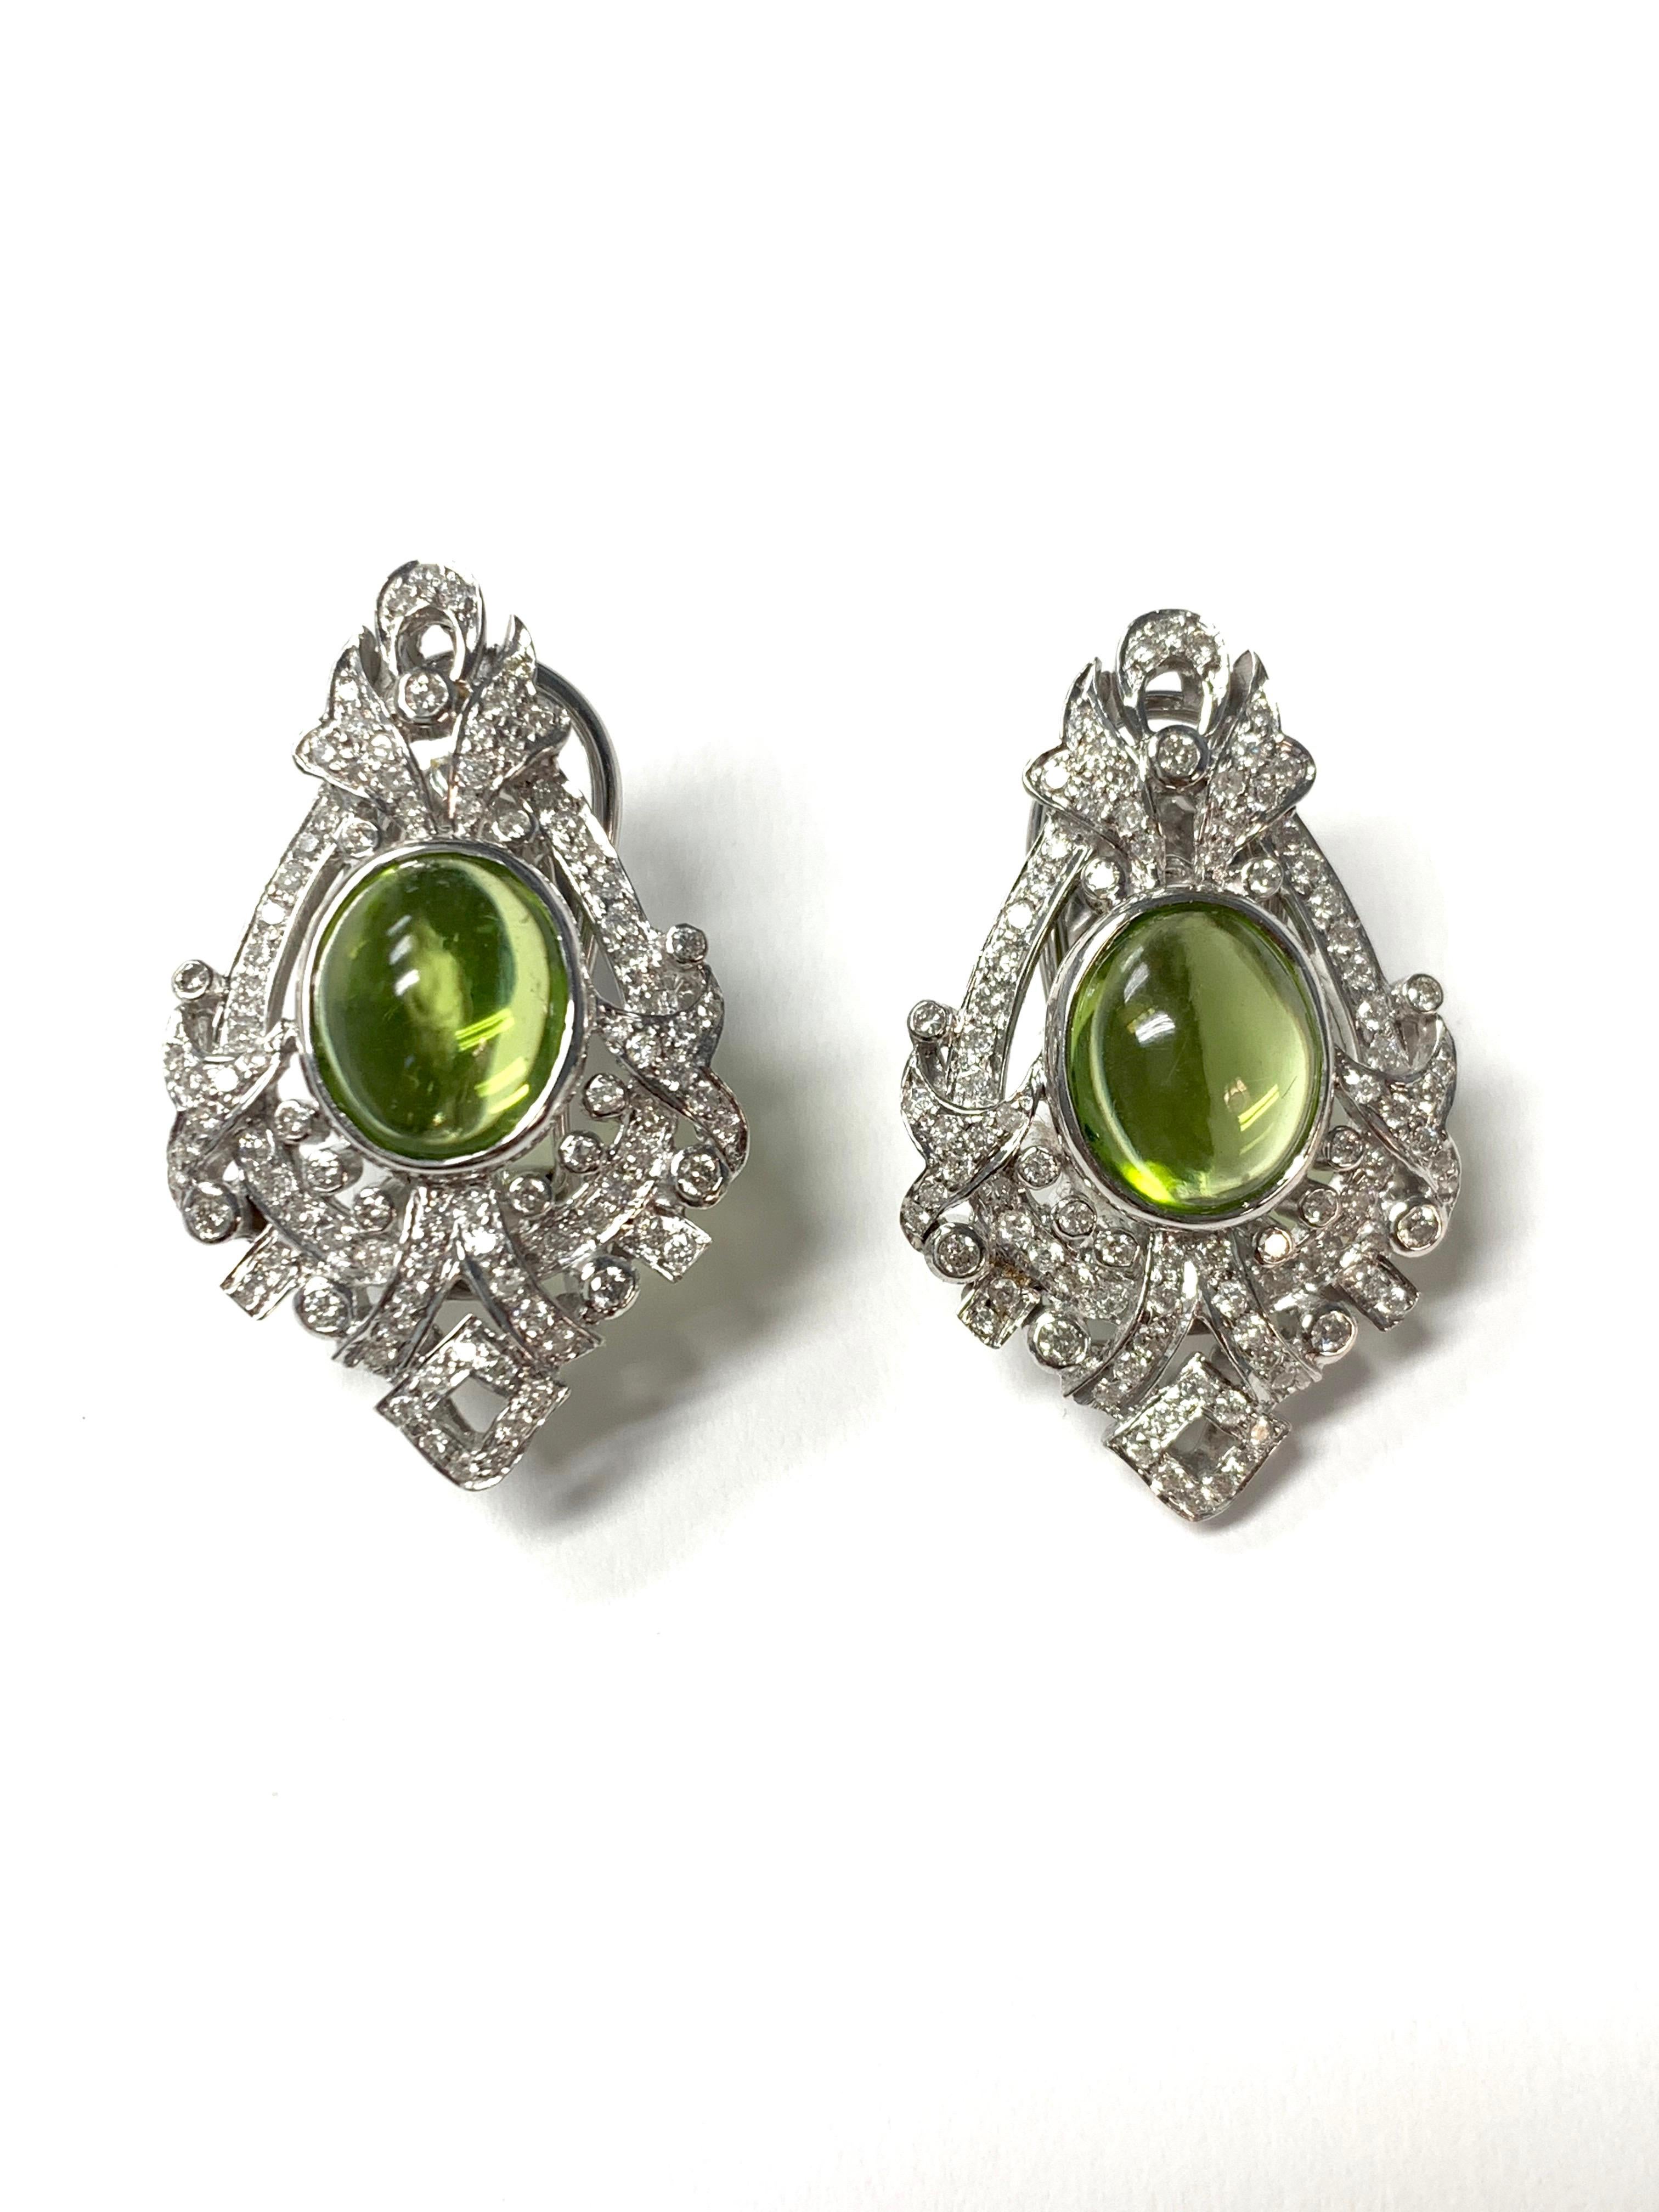 Diamond and Peridot Stud Earrings in 18k White Gold For Sale 3